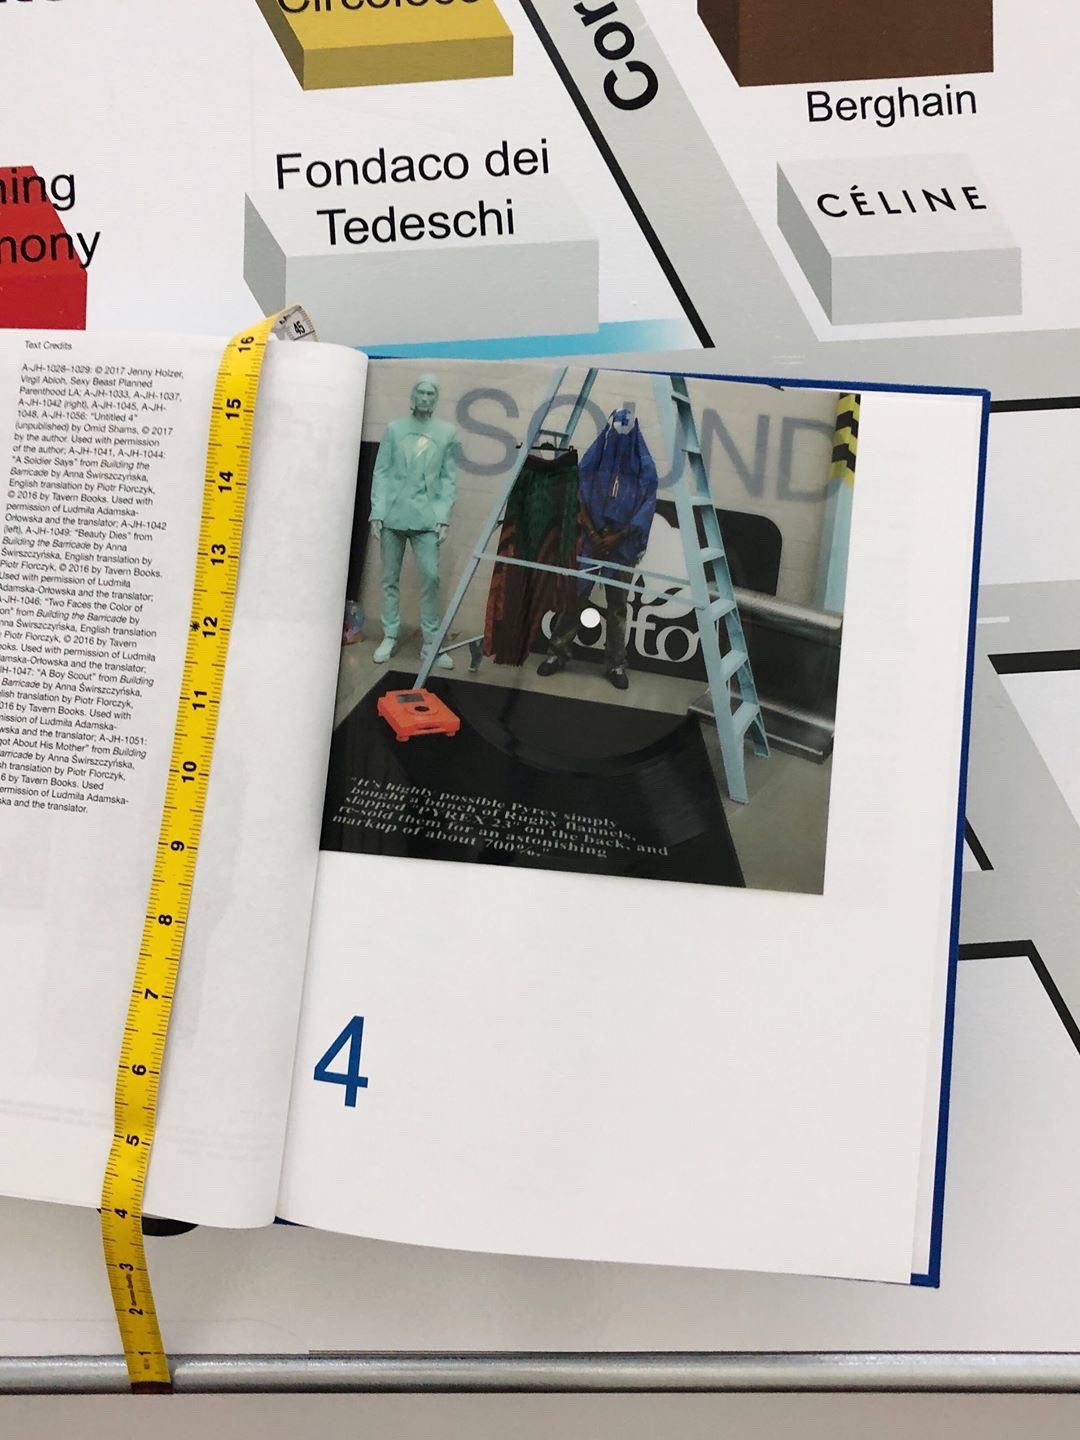 Virgil Abloh's Figures of Speech Is Being Released as a Special Edition